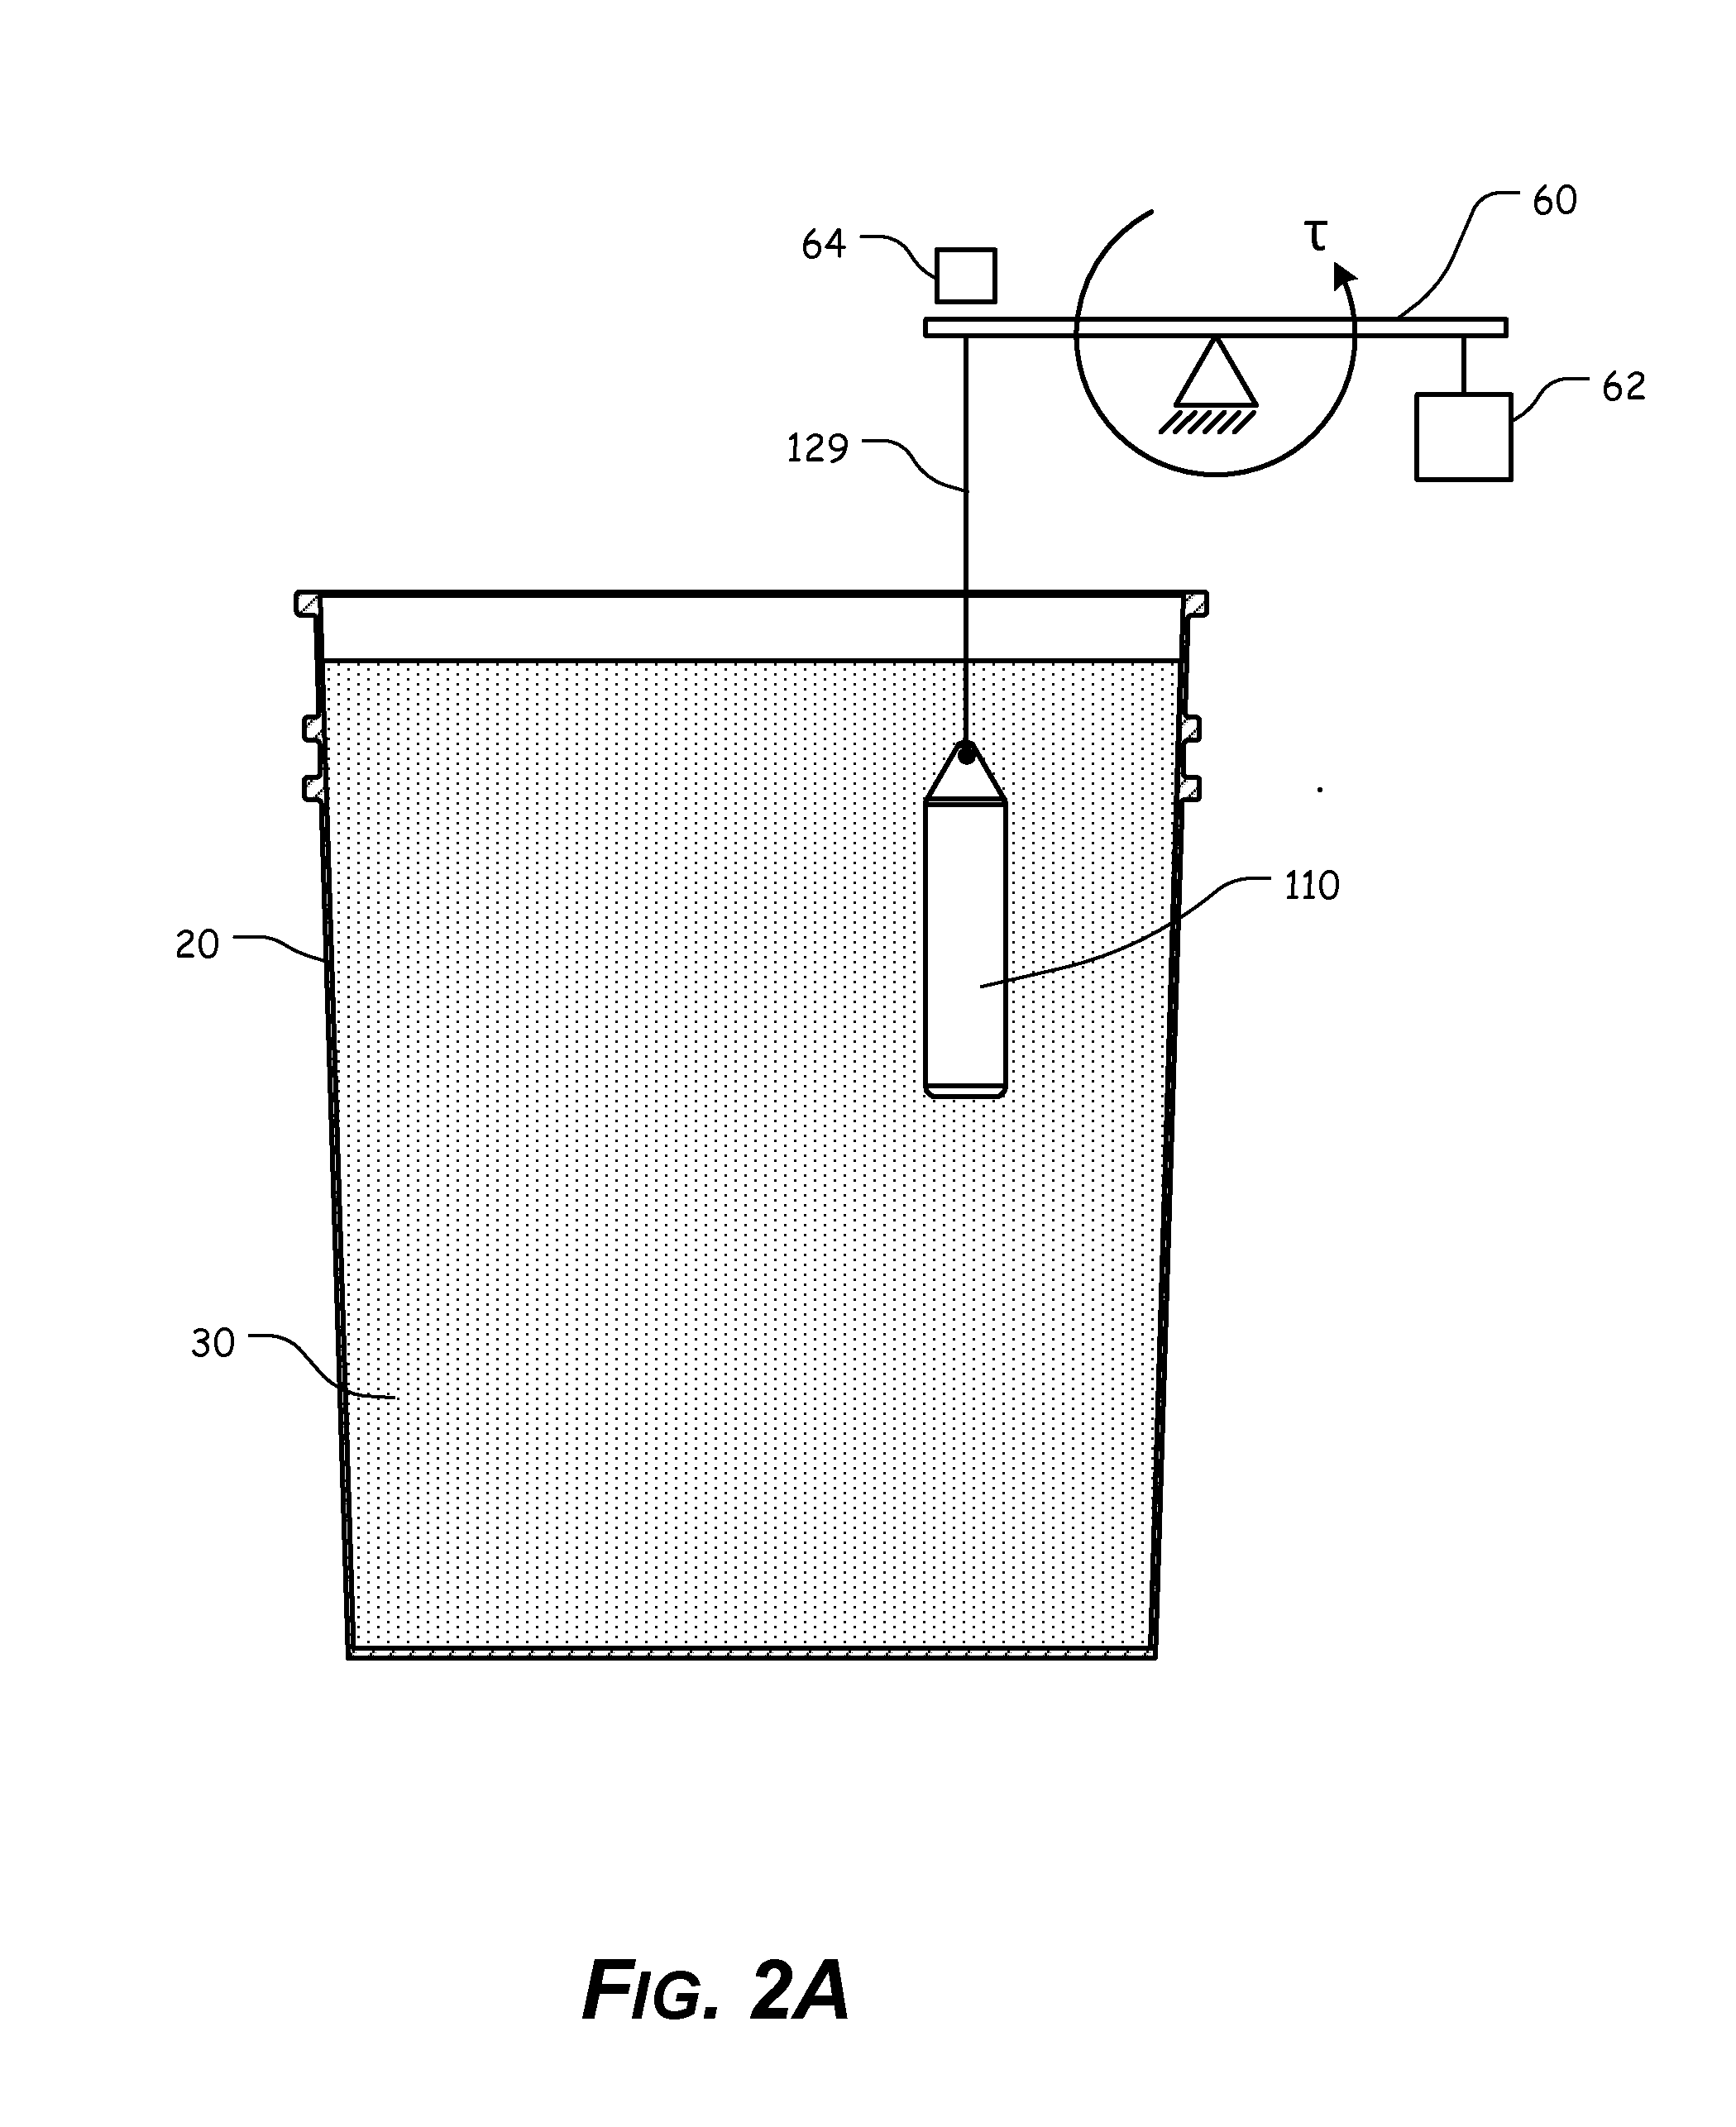 Systems, Methods, and Apparatuses for Monitoring and/or Controlling the Density of a Fluid